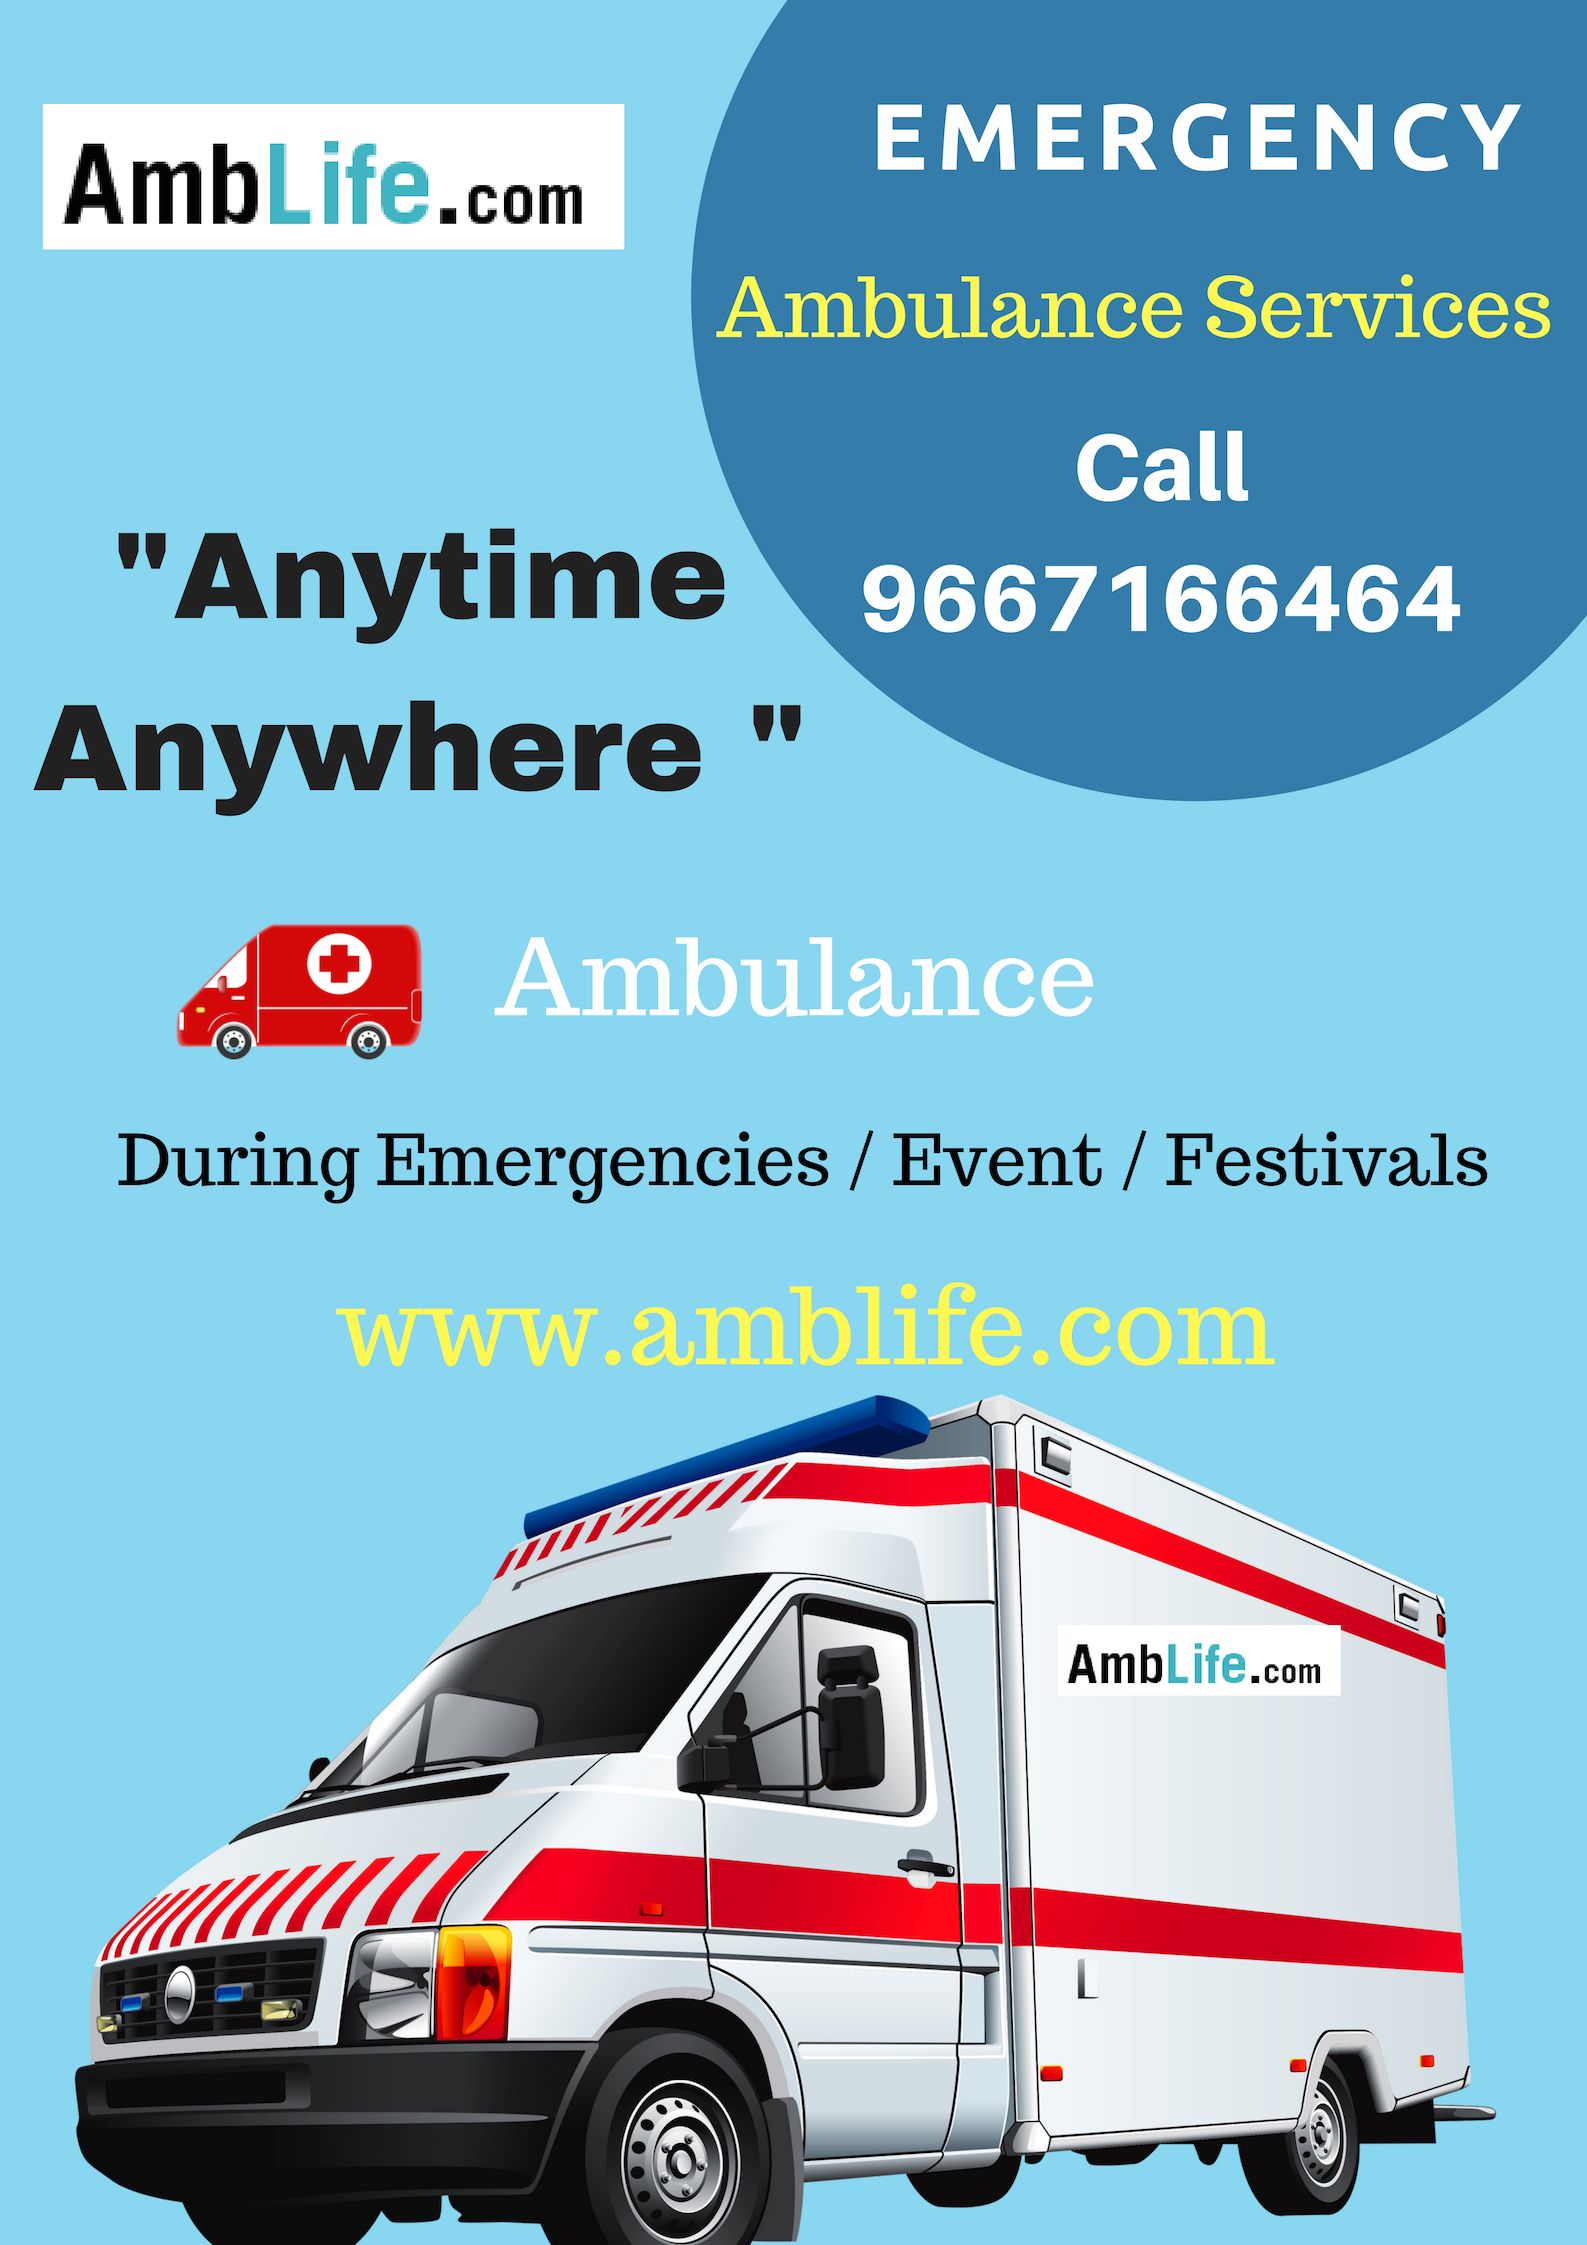 Ground Ambulance Services in Chandigarh – AMB LifeServicesHealth - FitnessAll Indiaother